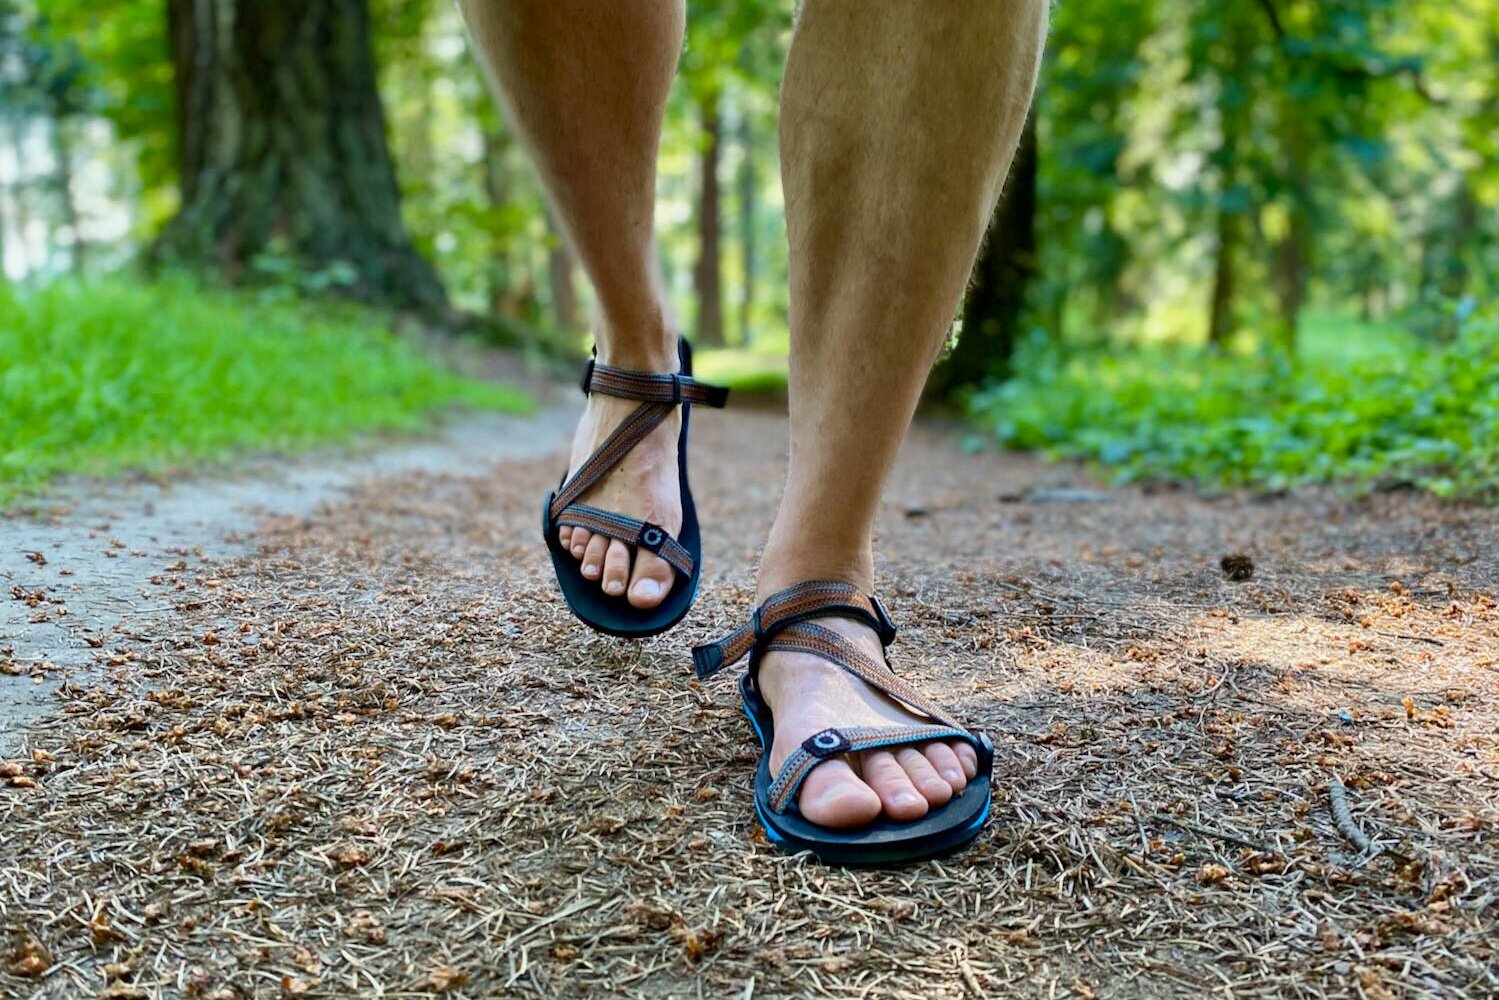 The Xero Shoes Z Trail are our favorite ultralight hiking sandals.